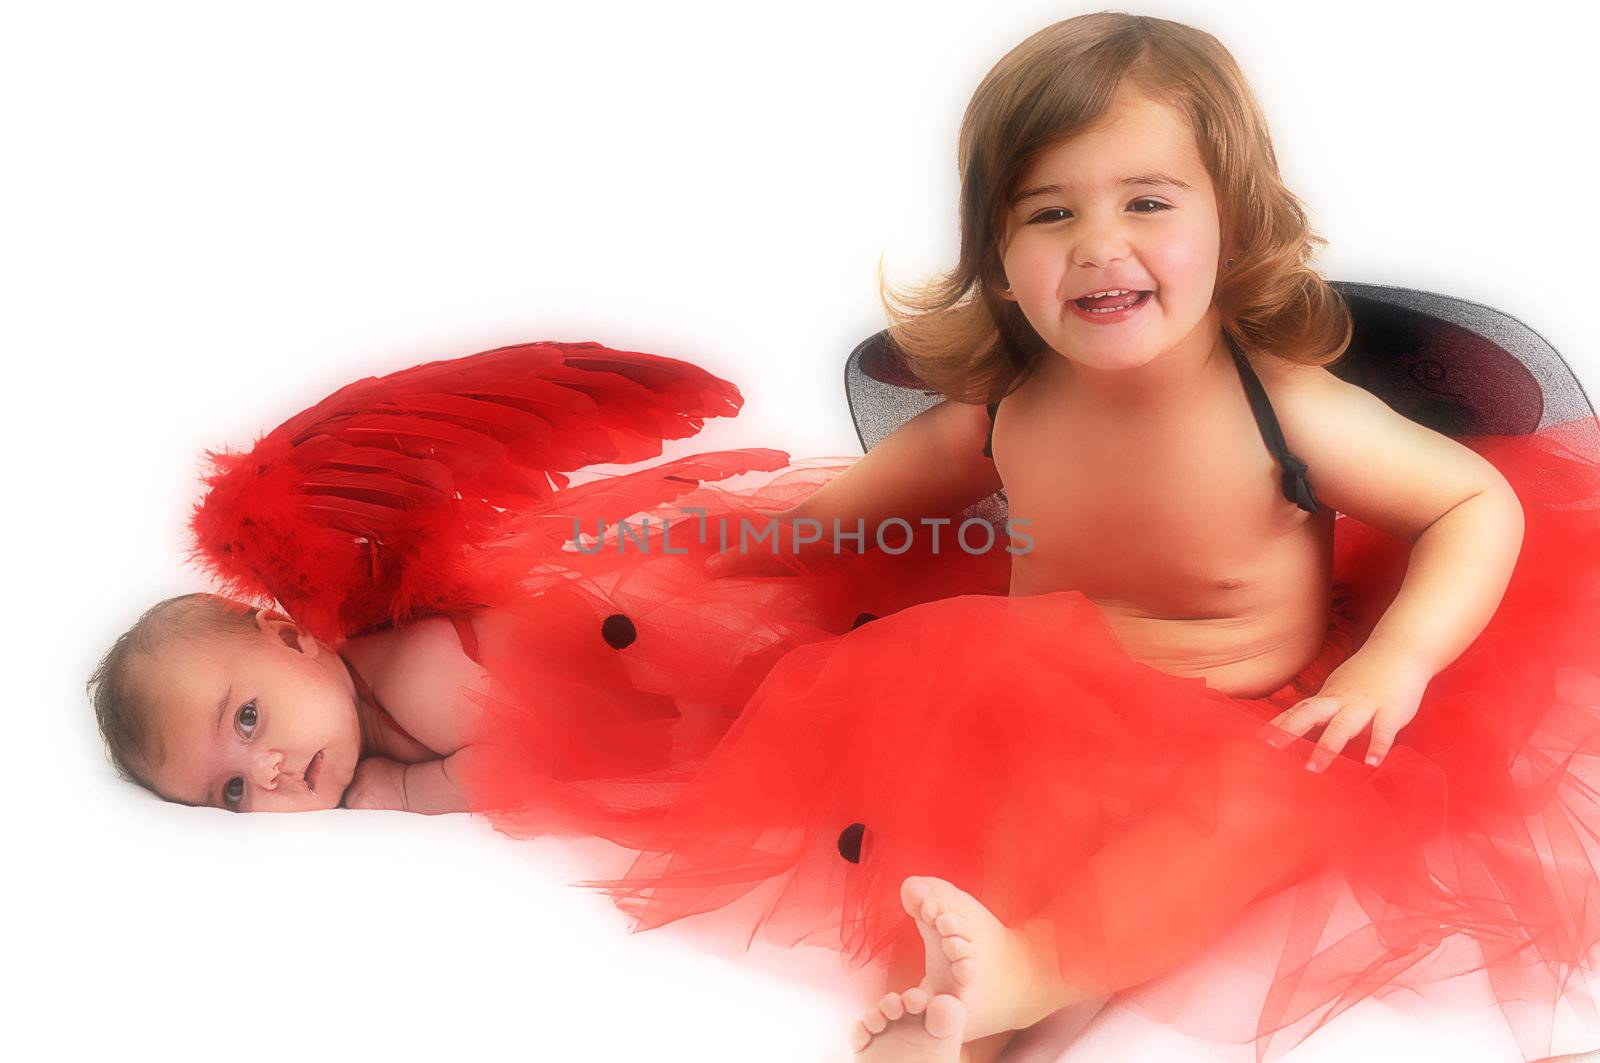 two sisters playing and smiling in studio wearing red angle wings